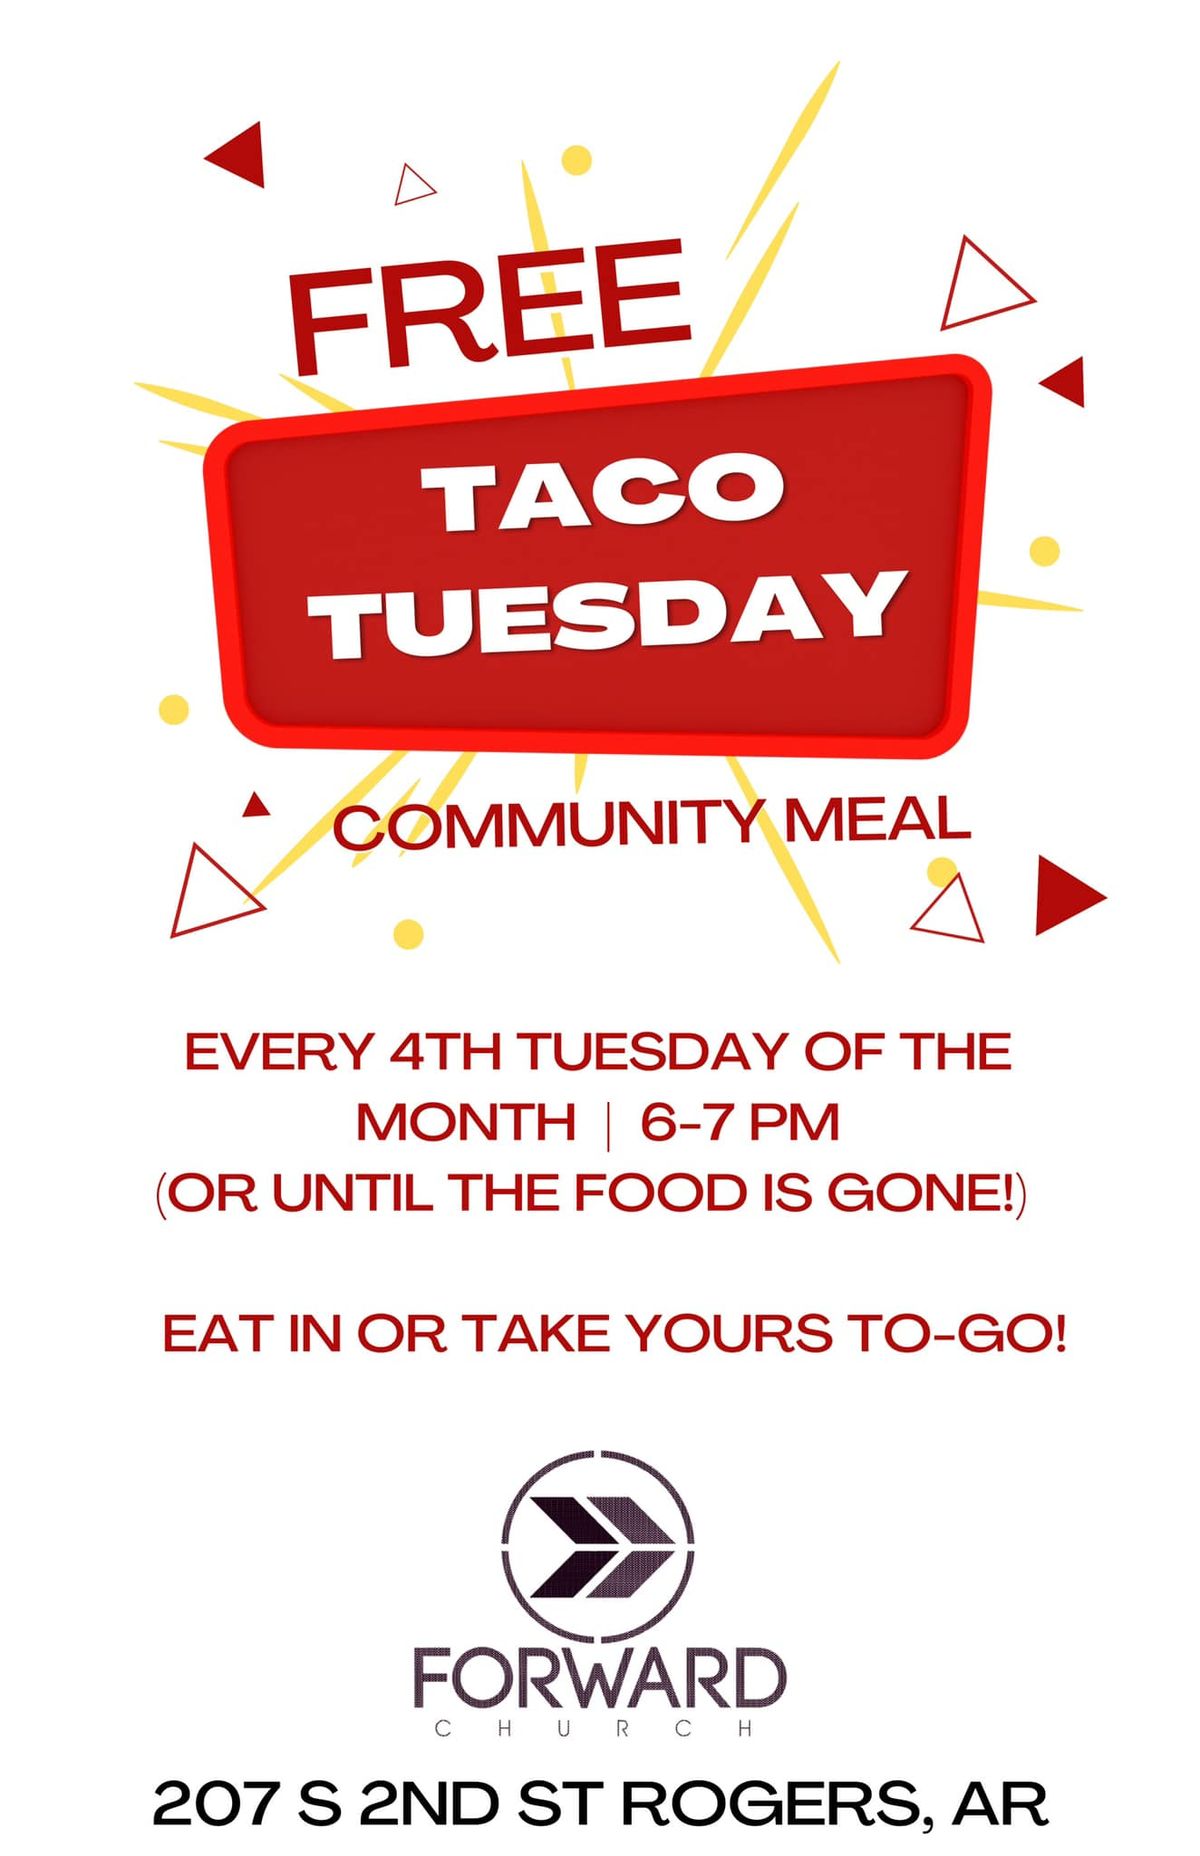 FREE Community Meal Taco Tuesday